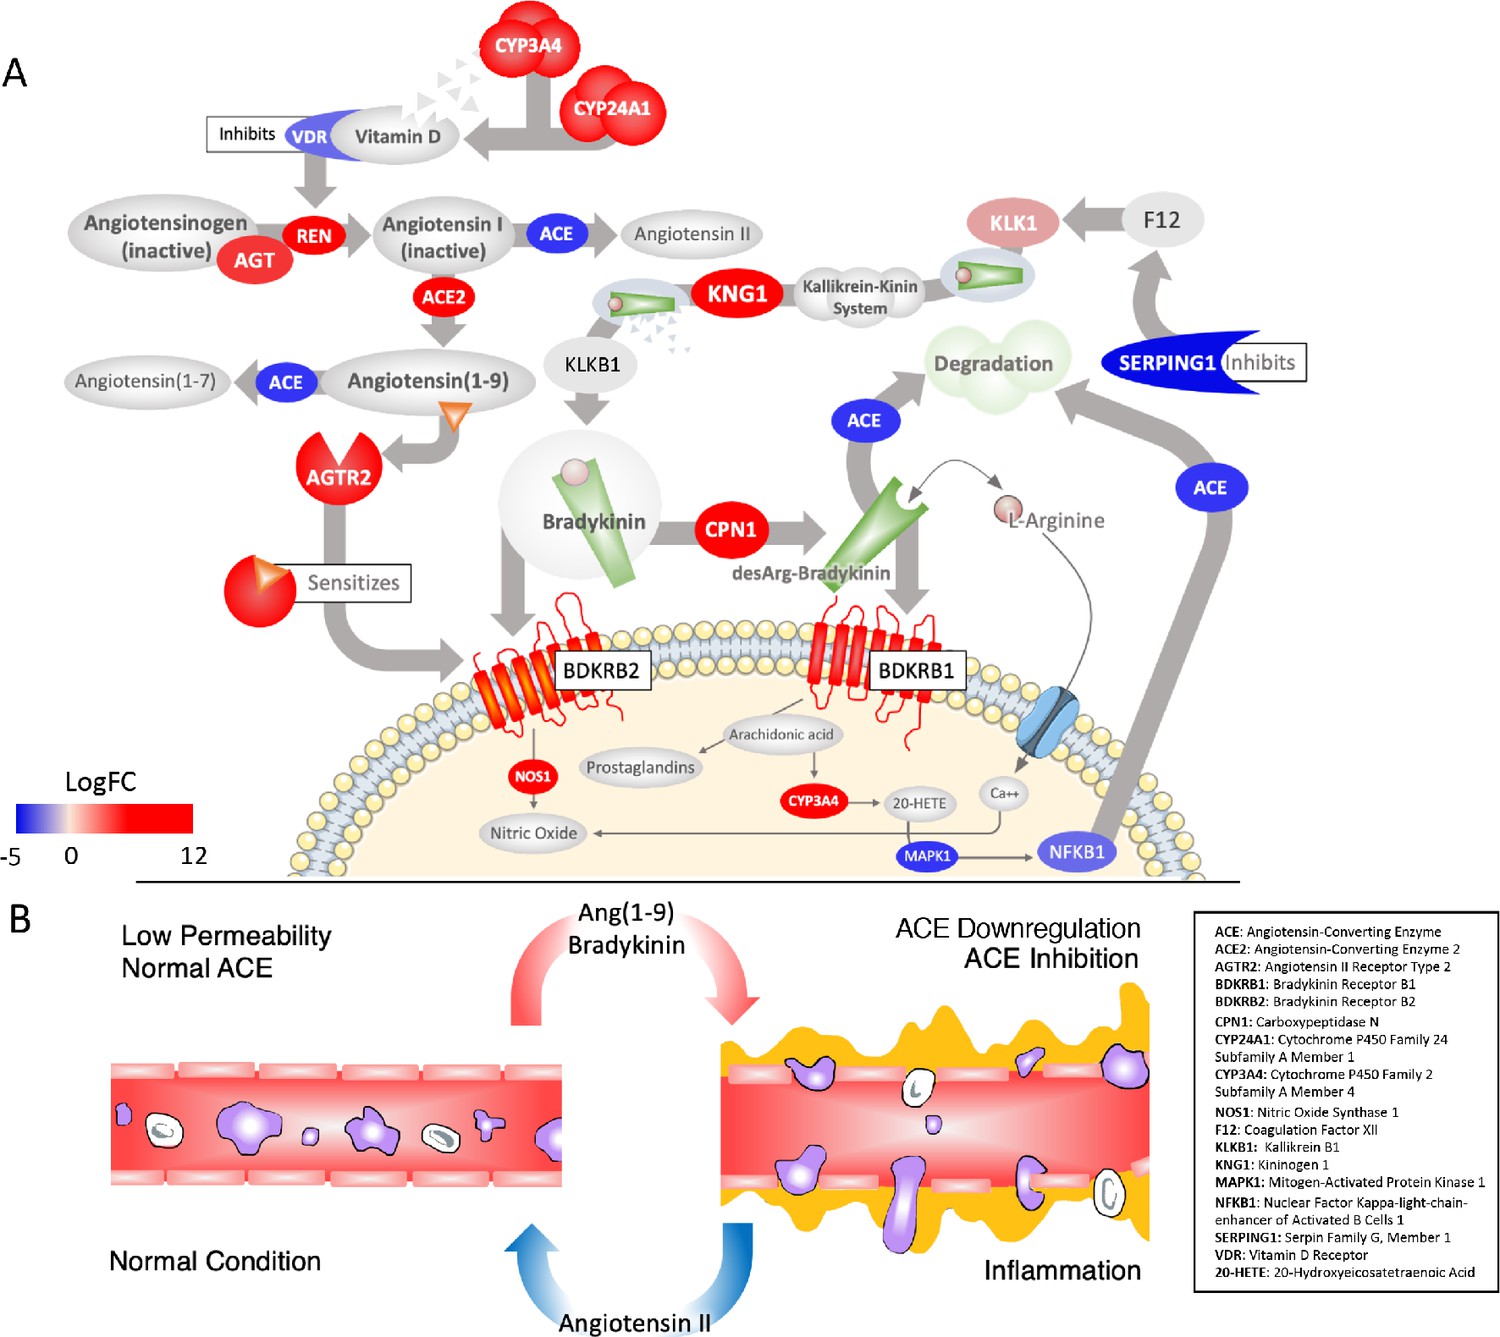 A mechanistic model and therapeutic interventions for COVID-19 